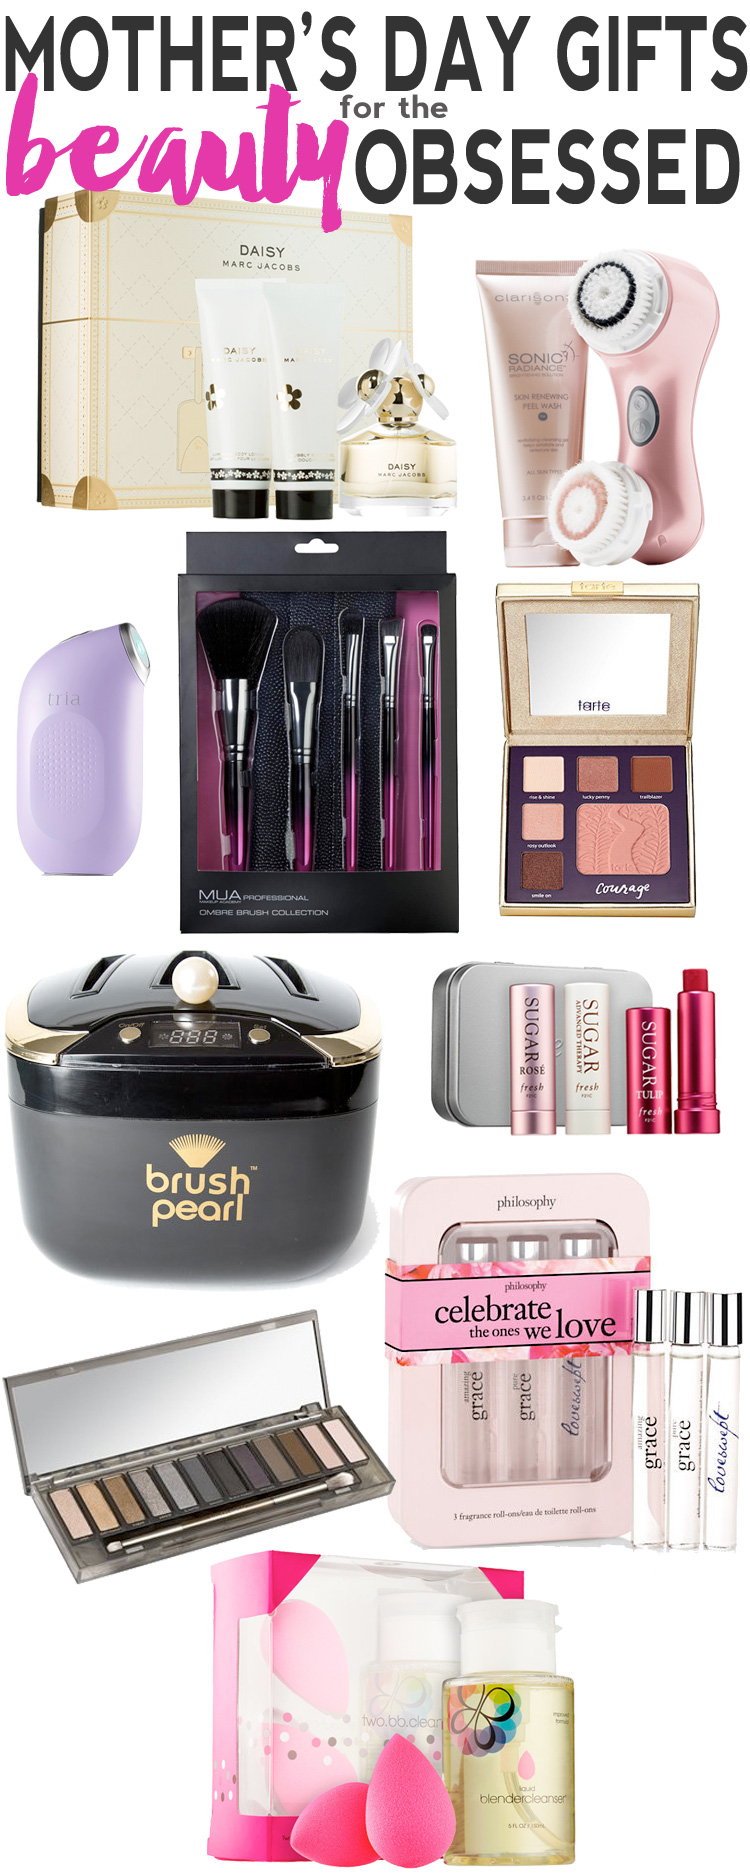 Top 10 Mother S Day Gift Ideas For The Beauty Obsessed Beautiful Makeup Search,Dining Table Lighting For Low Ceilings